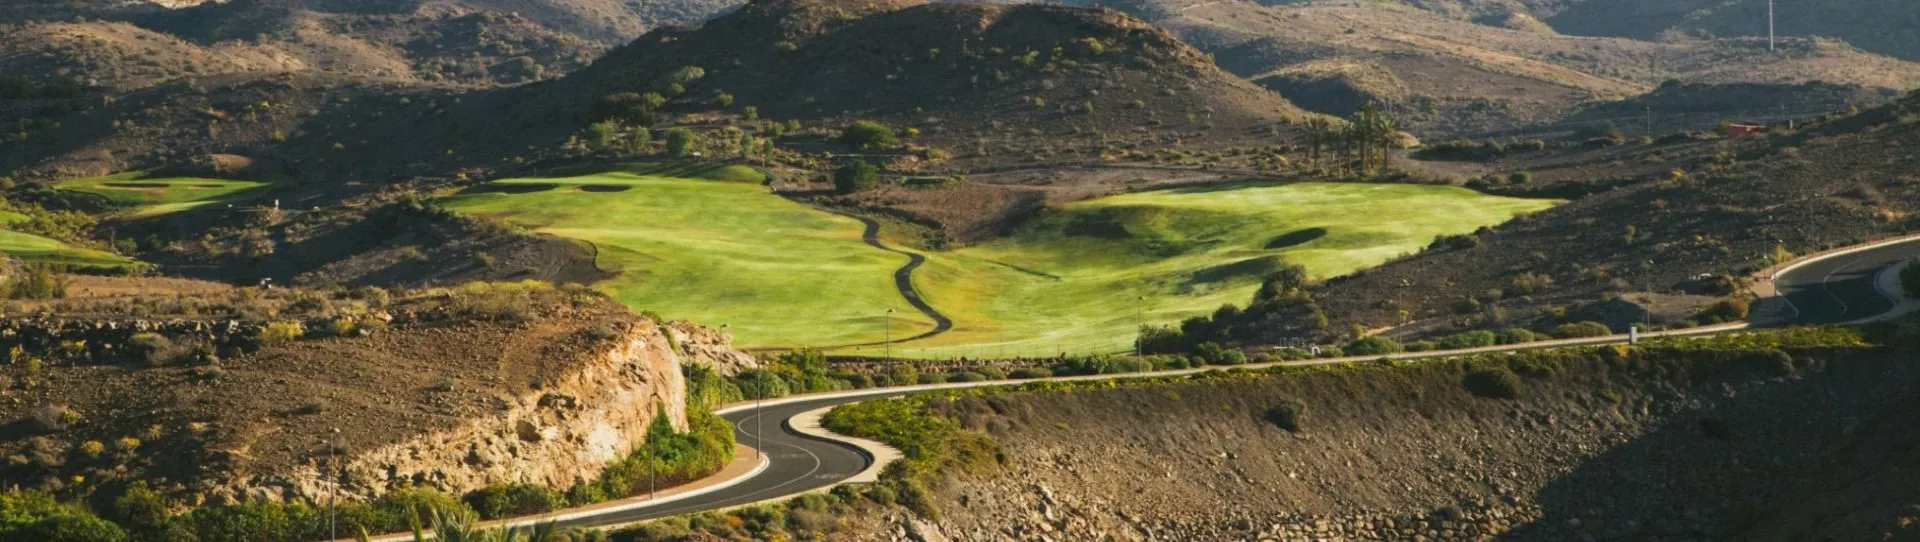 Spain golf holidays - 7 nights HB & 6 Golf Rounds - Photo 2